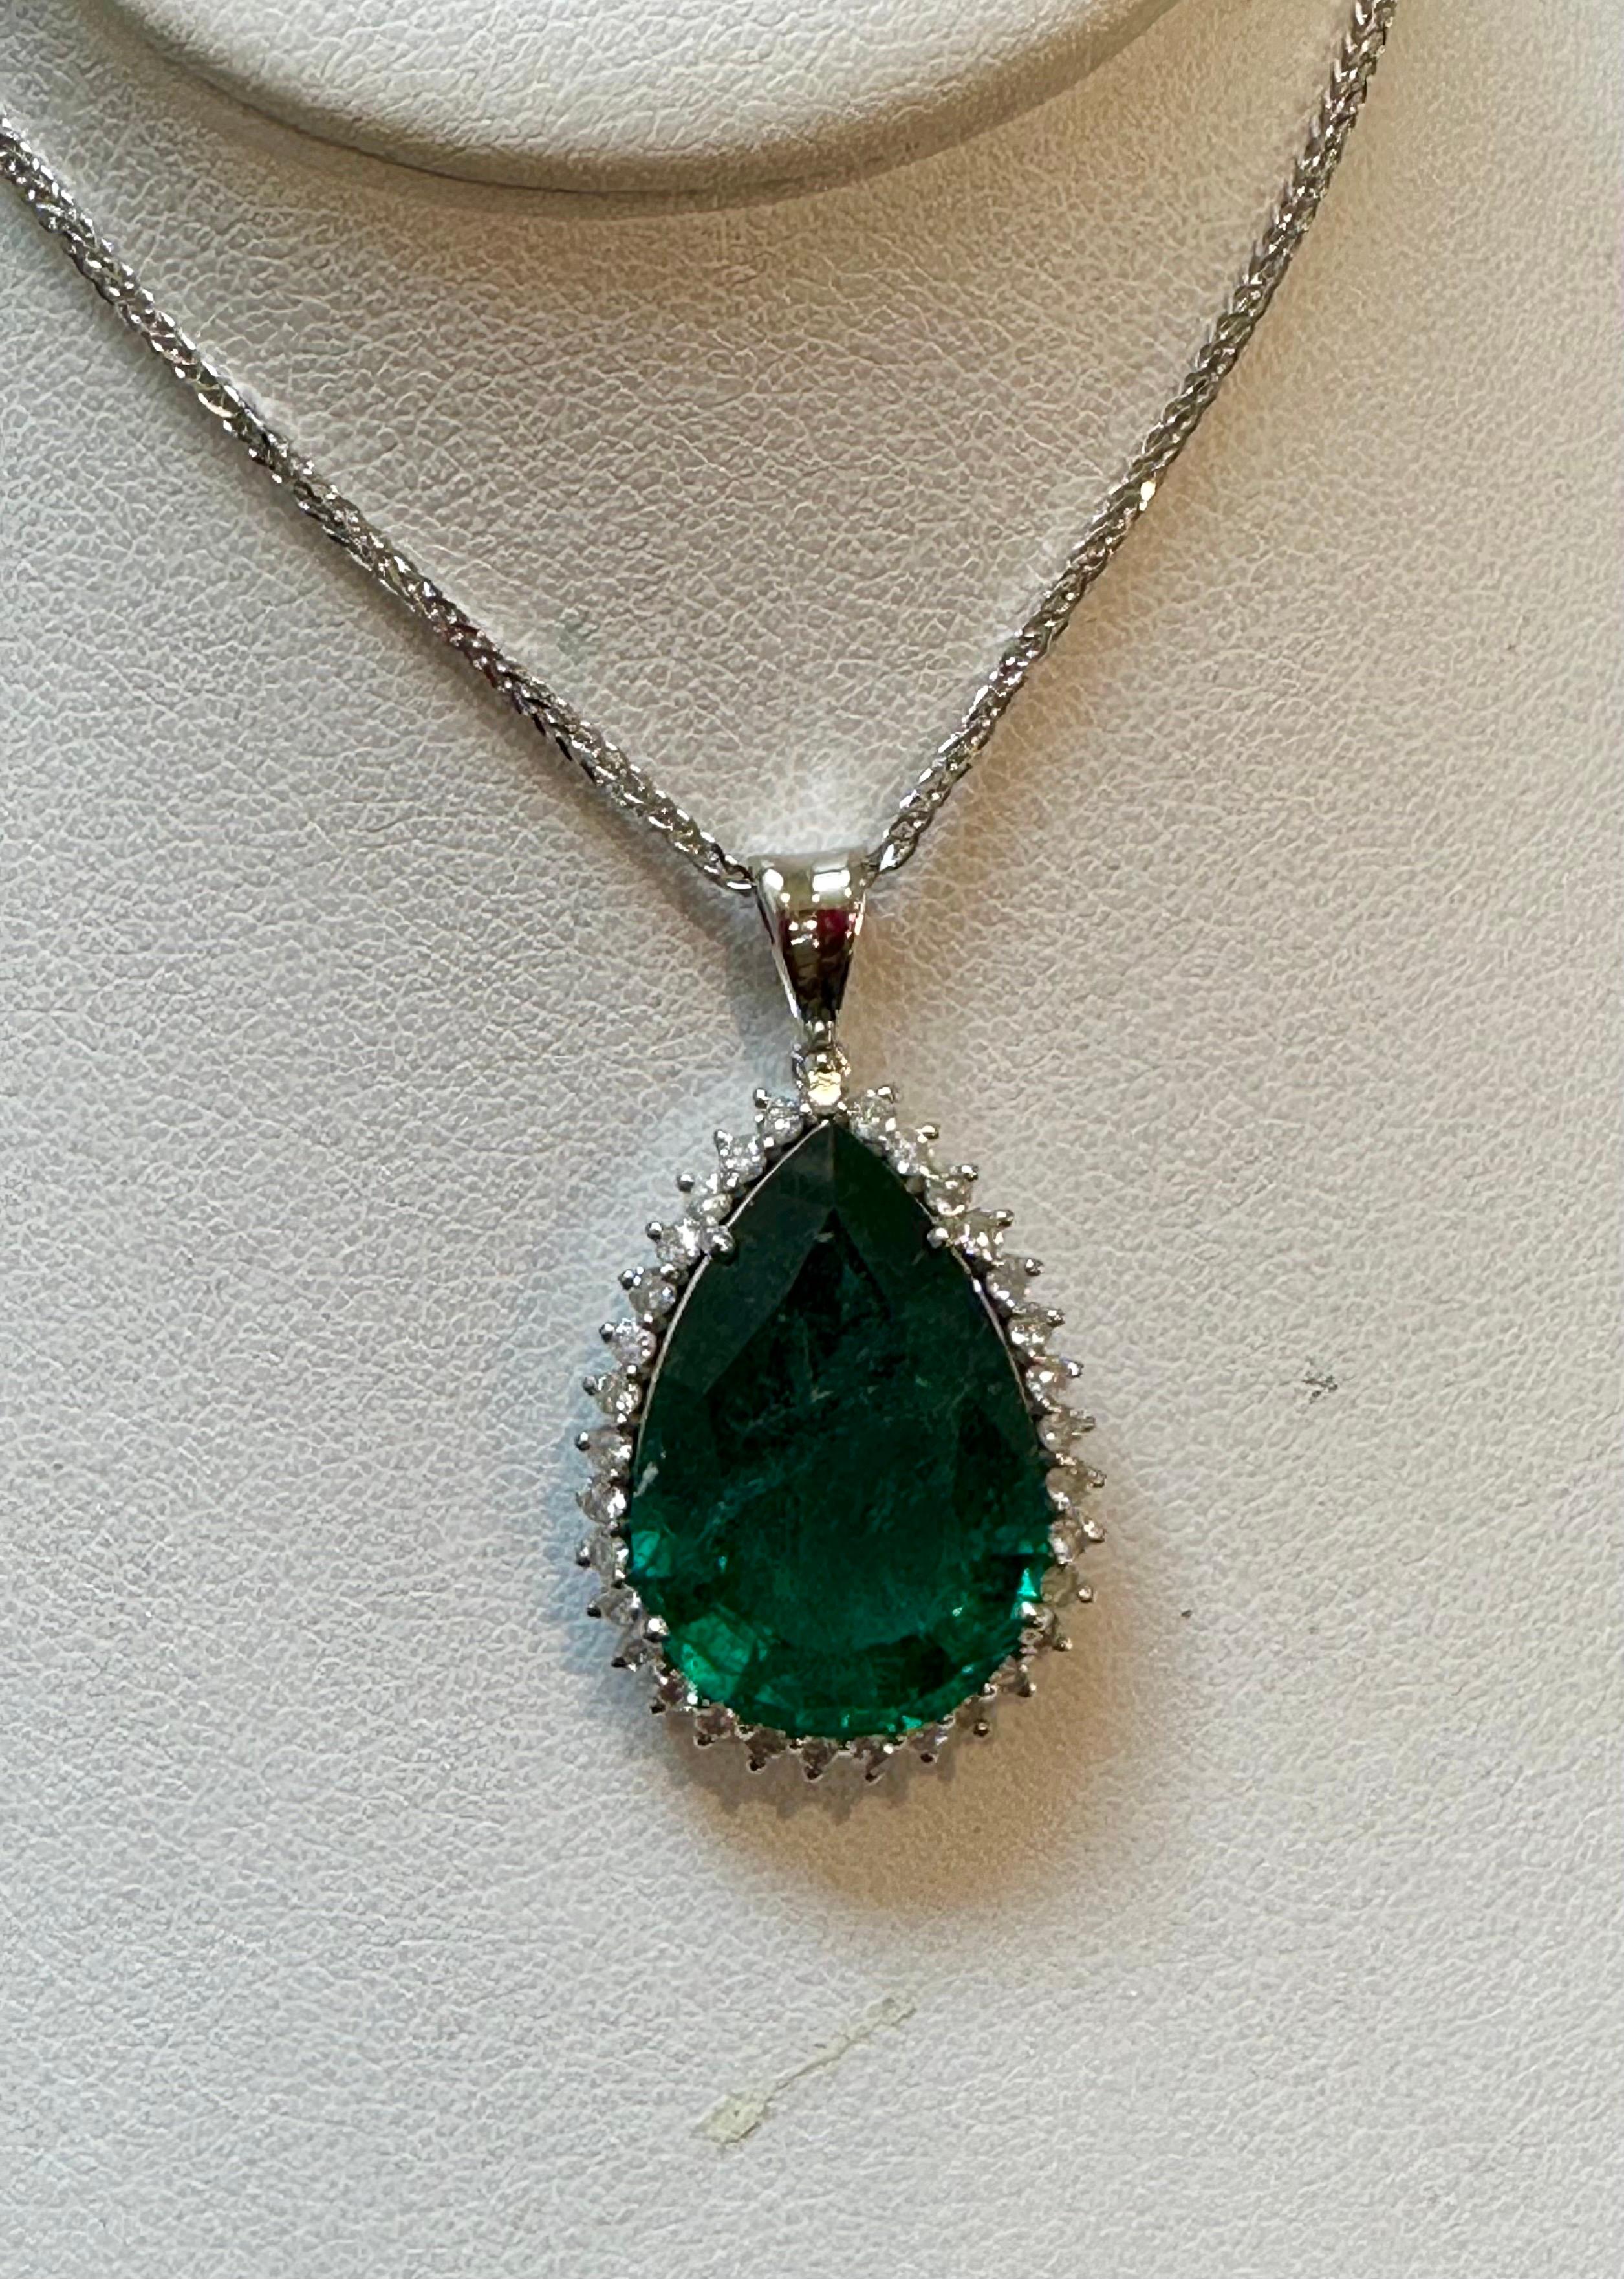 13 Ct Pear Cut Emerald & 1 Ct Diamond Halo Pendent/Necklace 14 KW Gold Chain 2